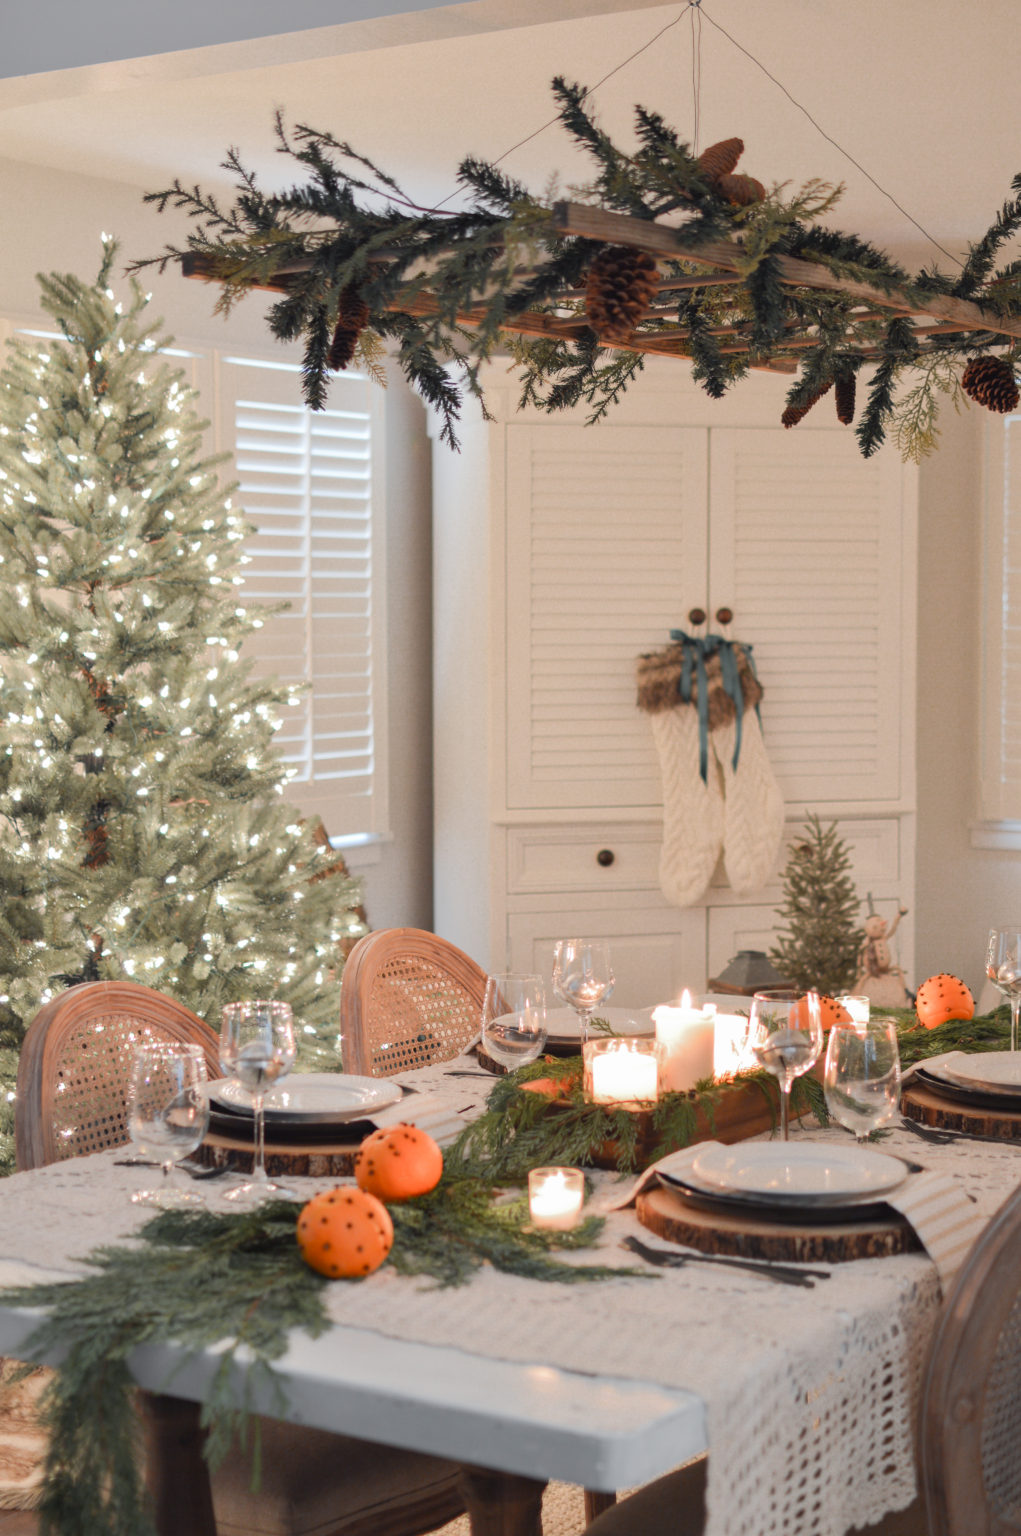 Citrus (scented) Christmas table